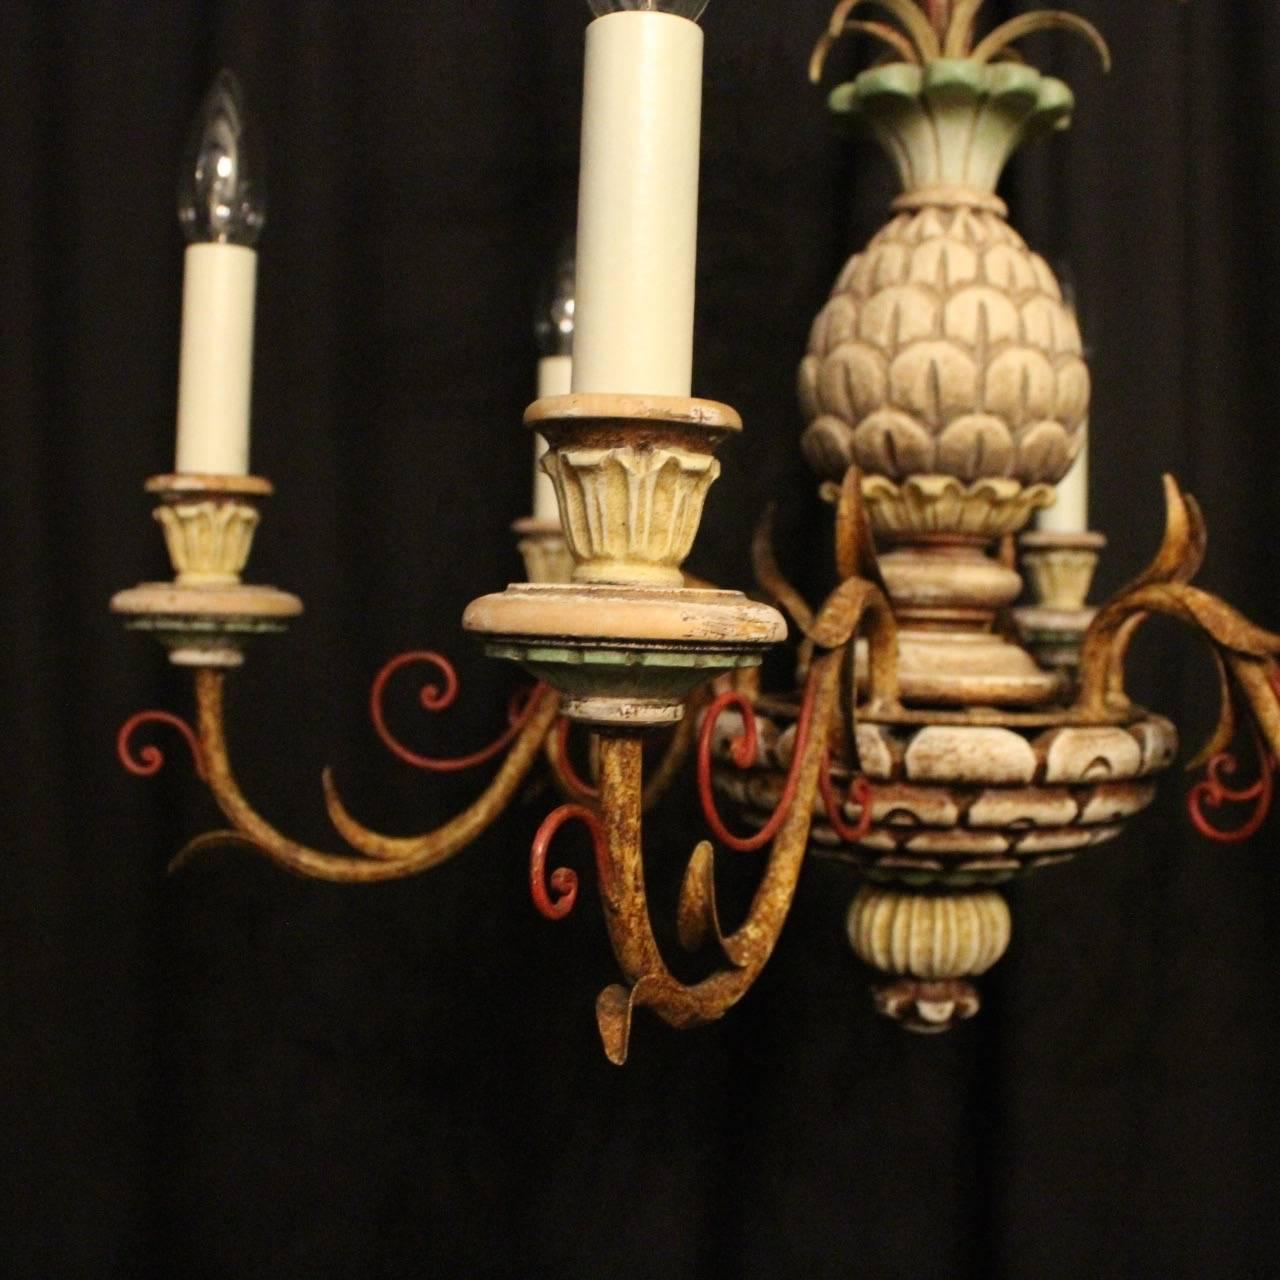 A decorative French polychrome six-light chandelier, the gilded metal leaf scrolling arms with wooden reeded bulbous candle sconces, issuing from a wooden pineapple baluster central column with wheat sheaf wirework canopy, having the original chain